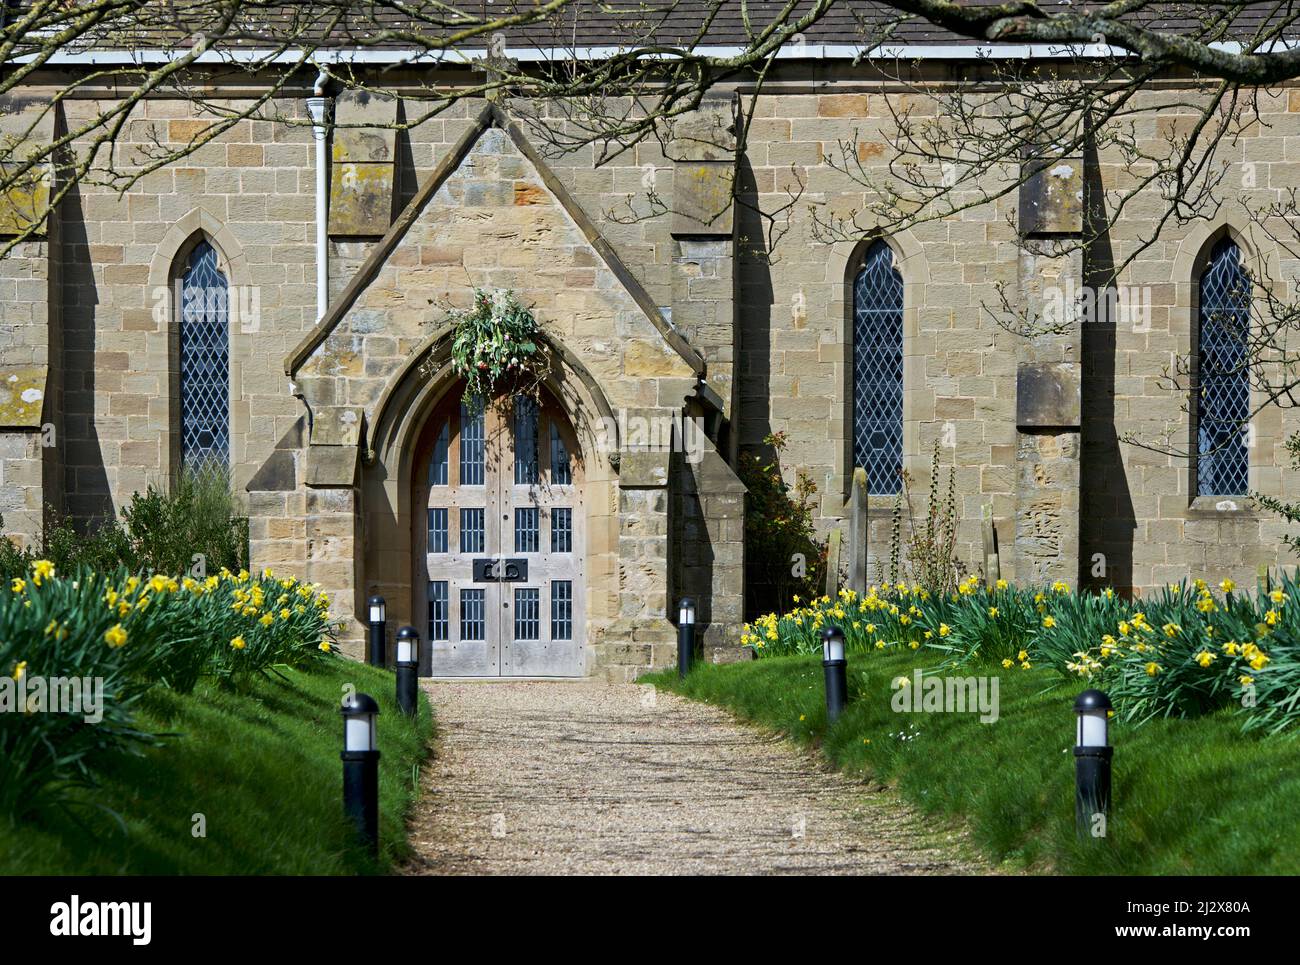 Springtime daffodils line the path to the porch of All Saints Church in the village of Lund, East Yorkshire, England UK Stock Photo